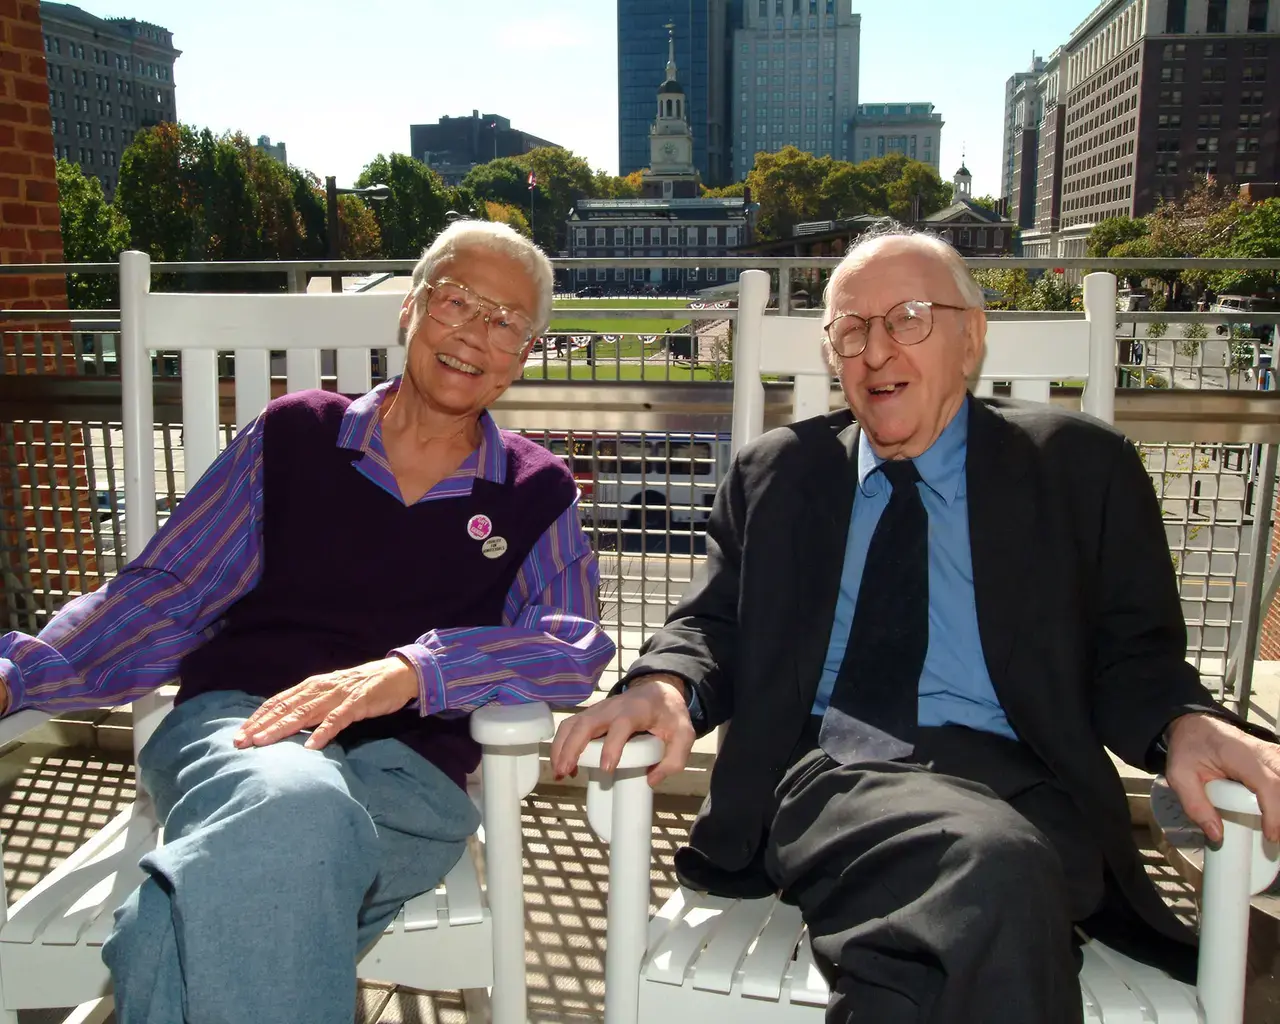 Barbara Gittings and Frank Kameny, the Father and Mother of the LGBT civil rights movement at Independence Hall in Philadelphia, 2005. Photo &copy; Equality Forum.